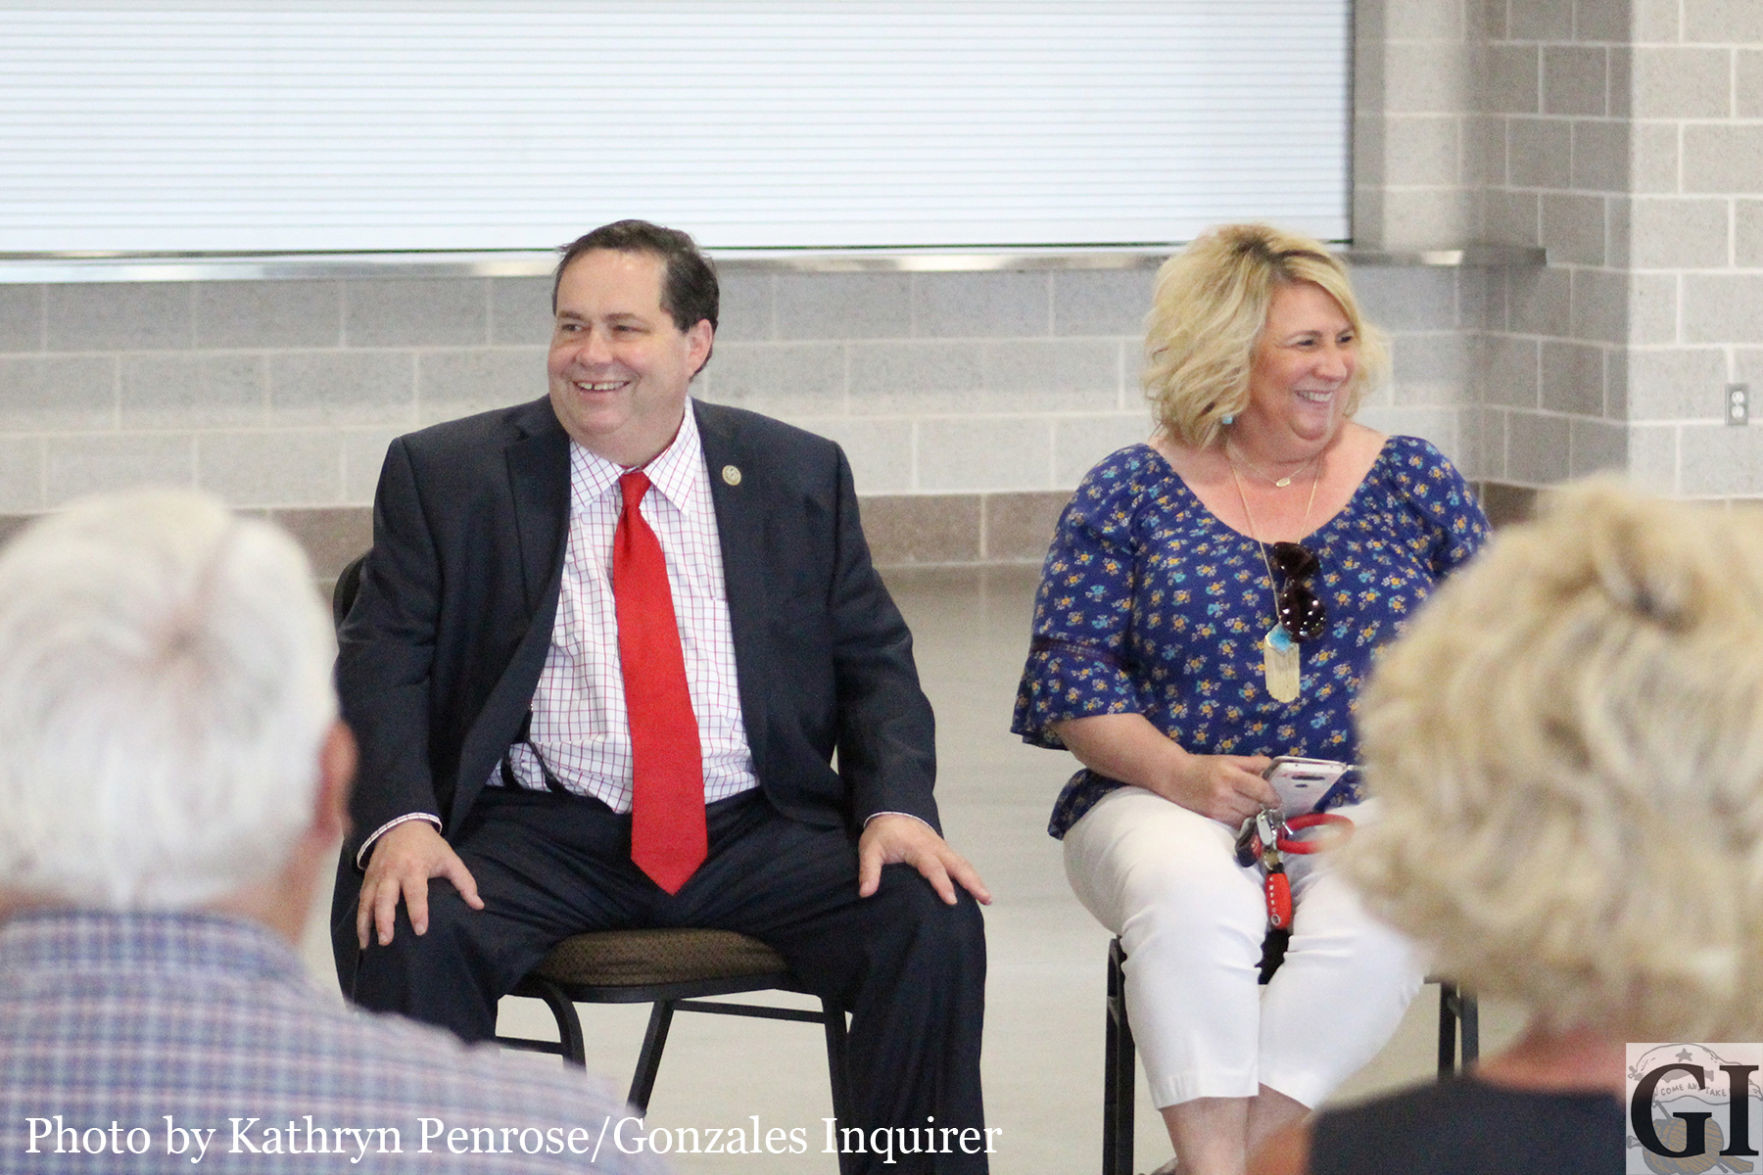 Gonzales citizens made their way to the Expo Center on Wednesday afternoon for an impromptu discussion with US Congressman Blake Farenthold (R) Dist. 27, Texas, to discuss the happenings in Washington, D.C.